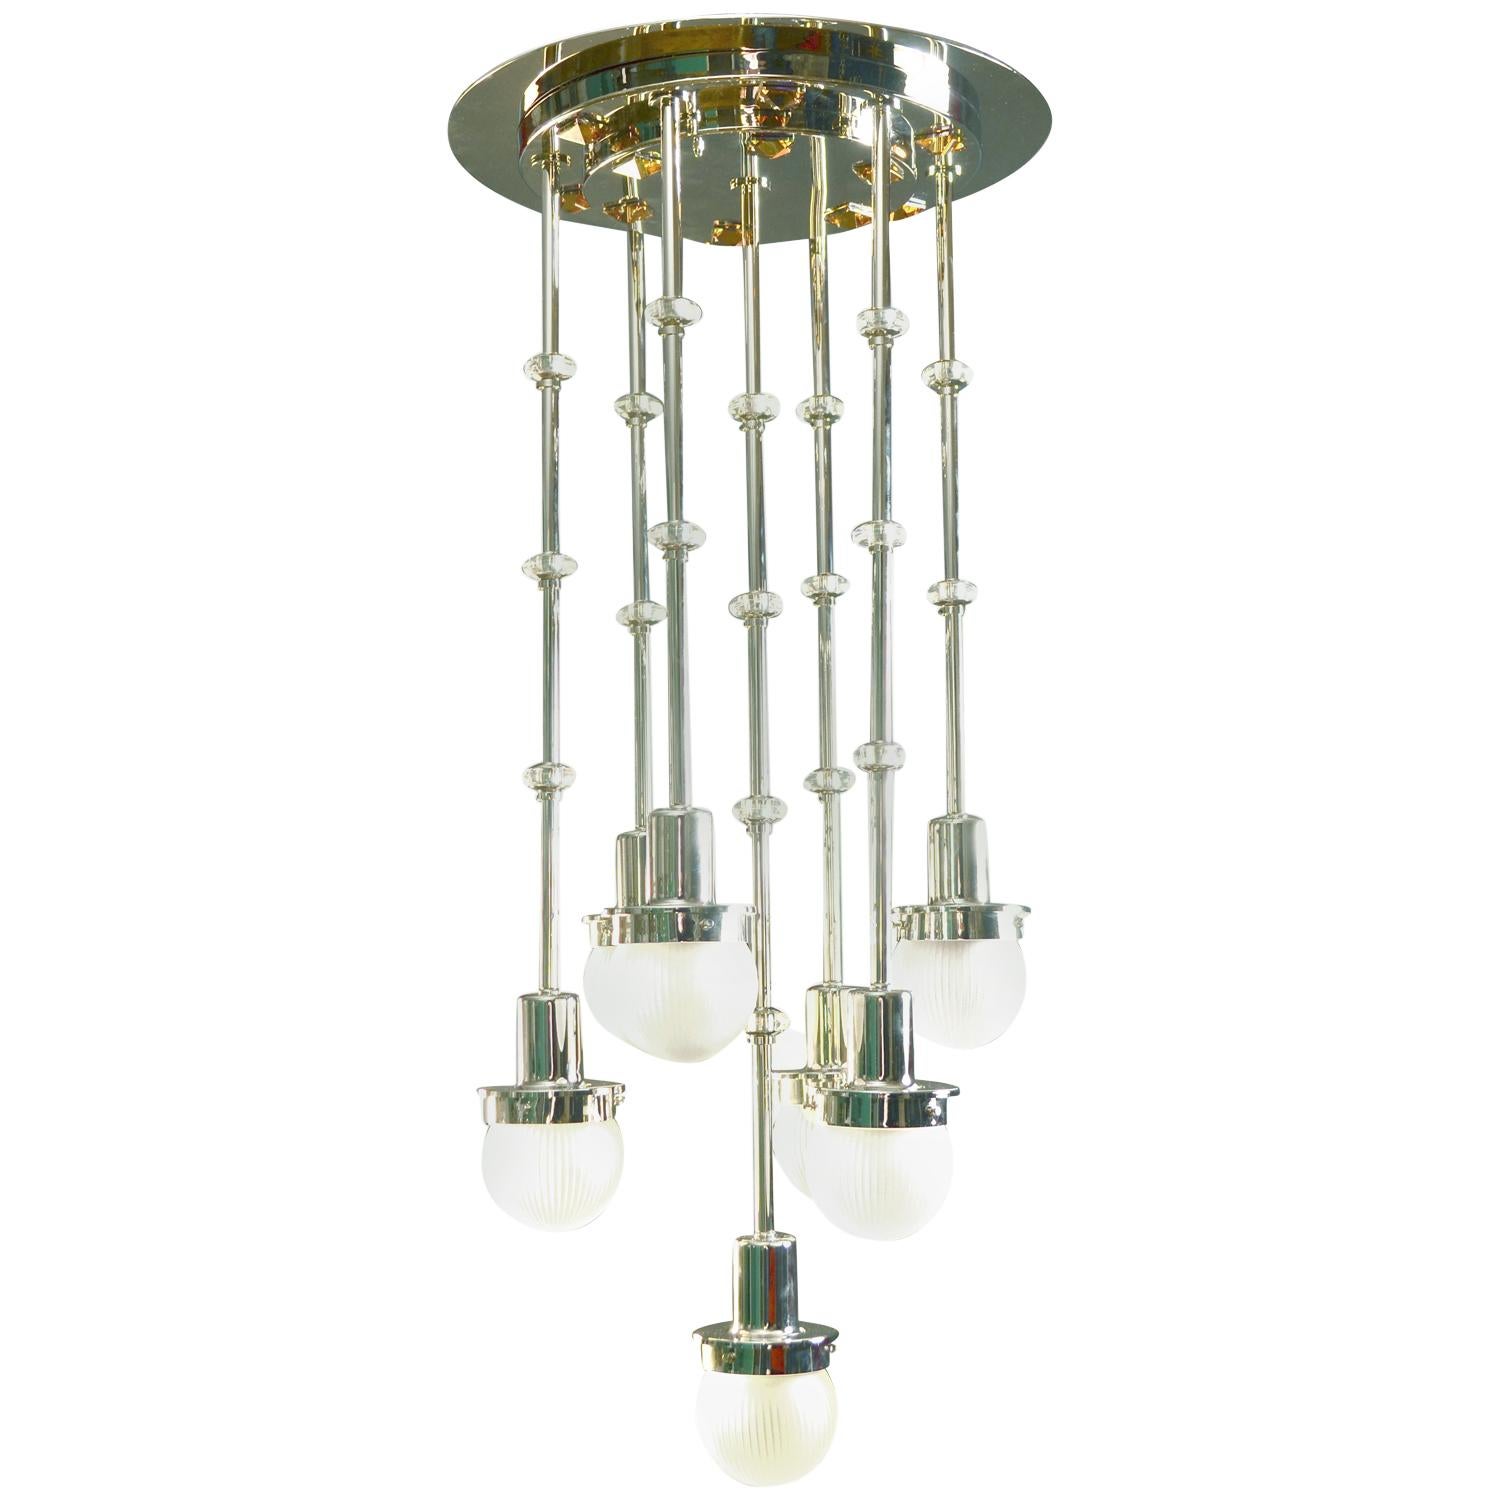 Variation of the magnificent chandelier for the 